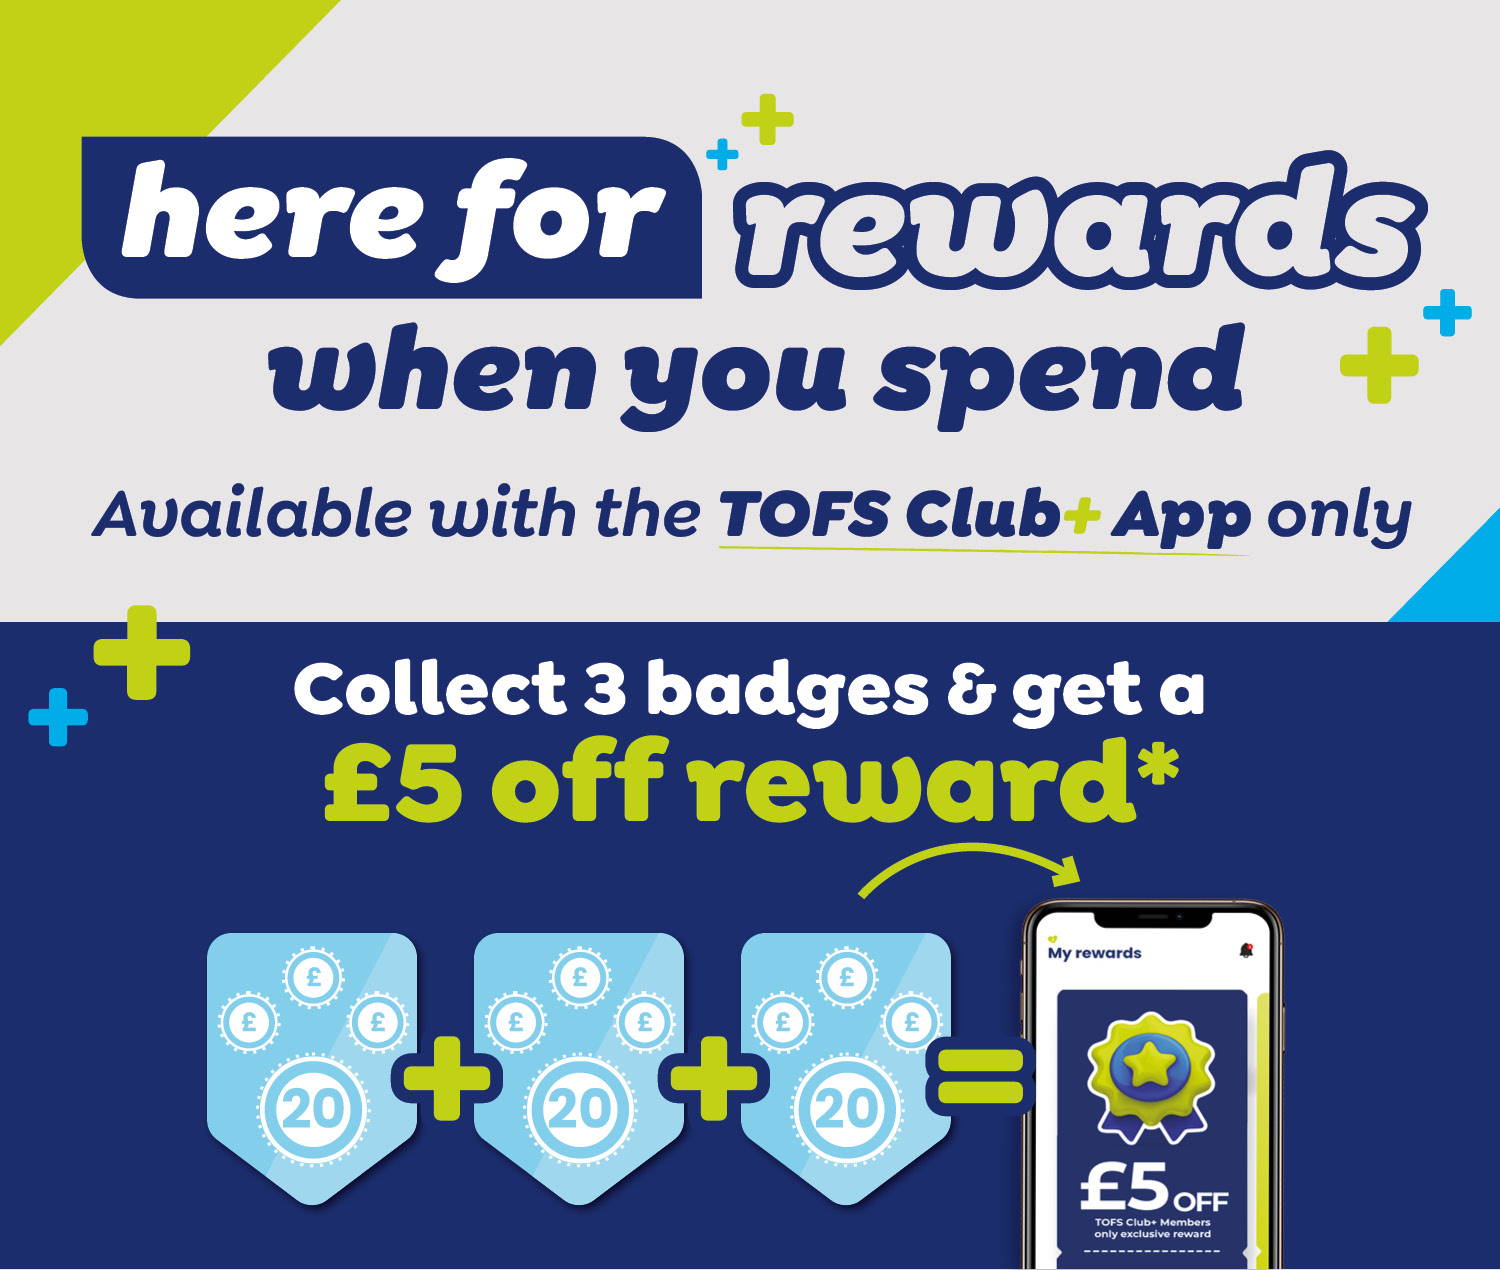 Here for rewards when you spend.  Available with the TOFS Club+ App only. Collect 3 badges & get a £5 off reward*